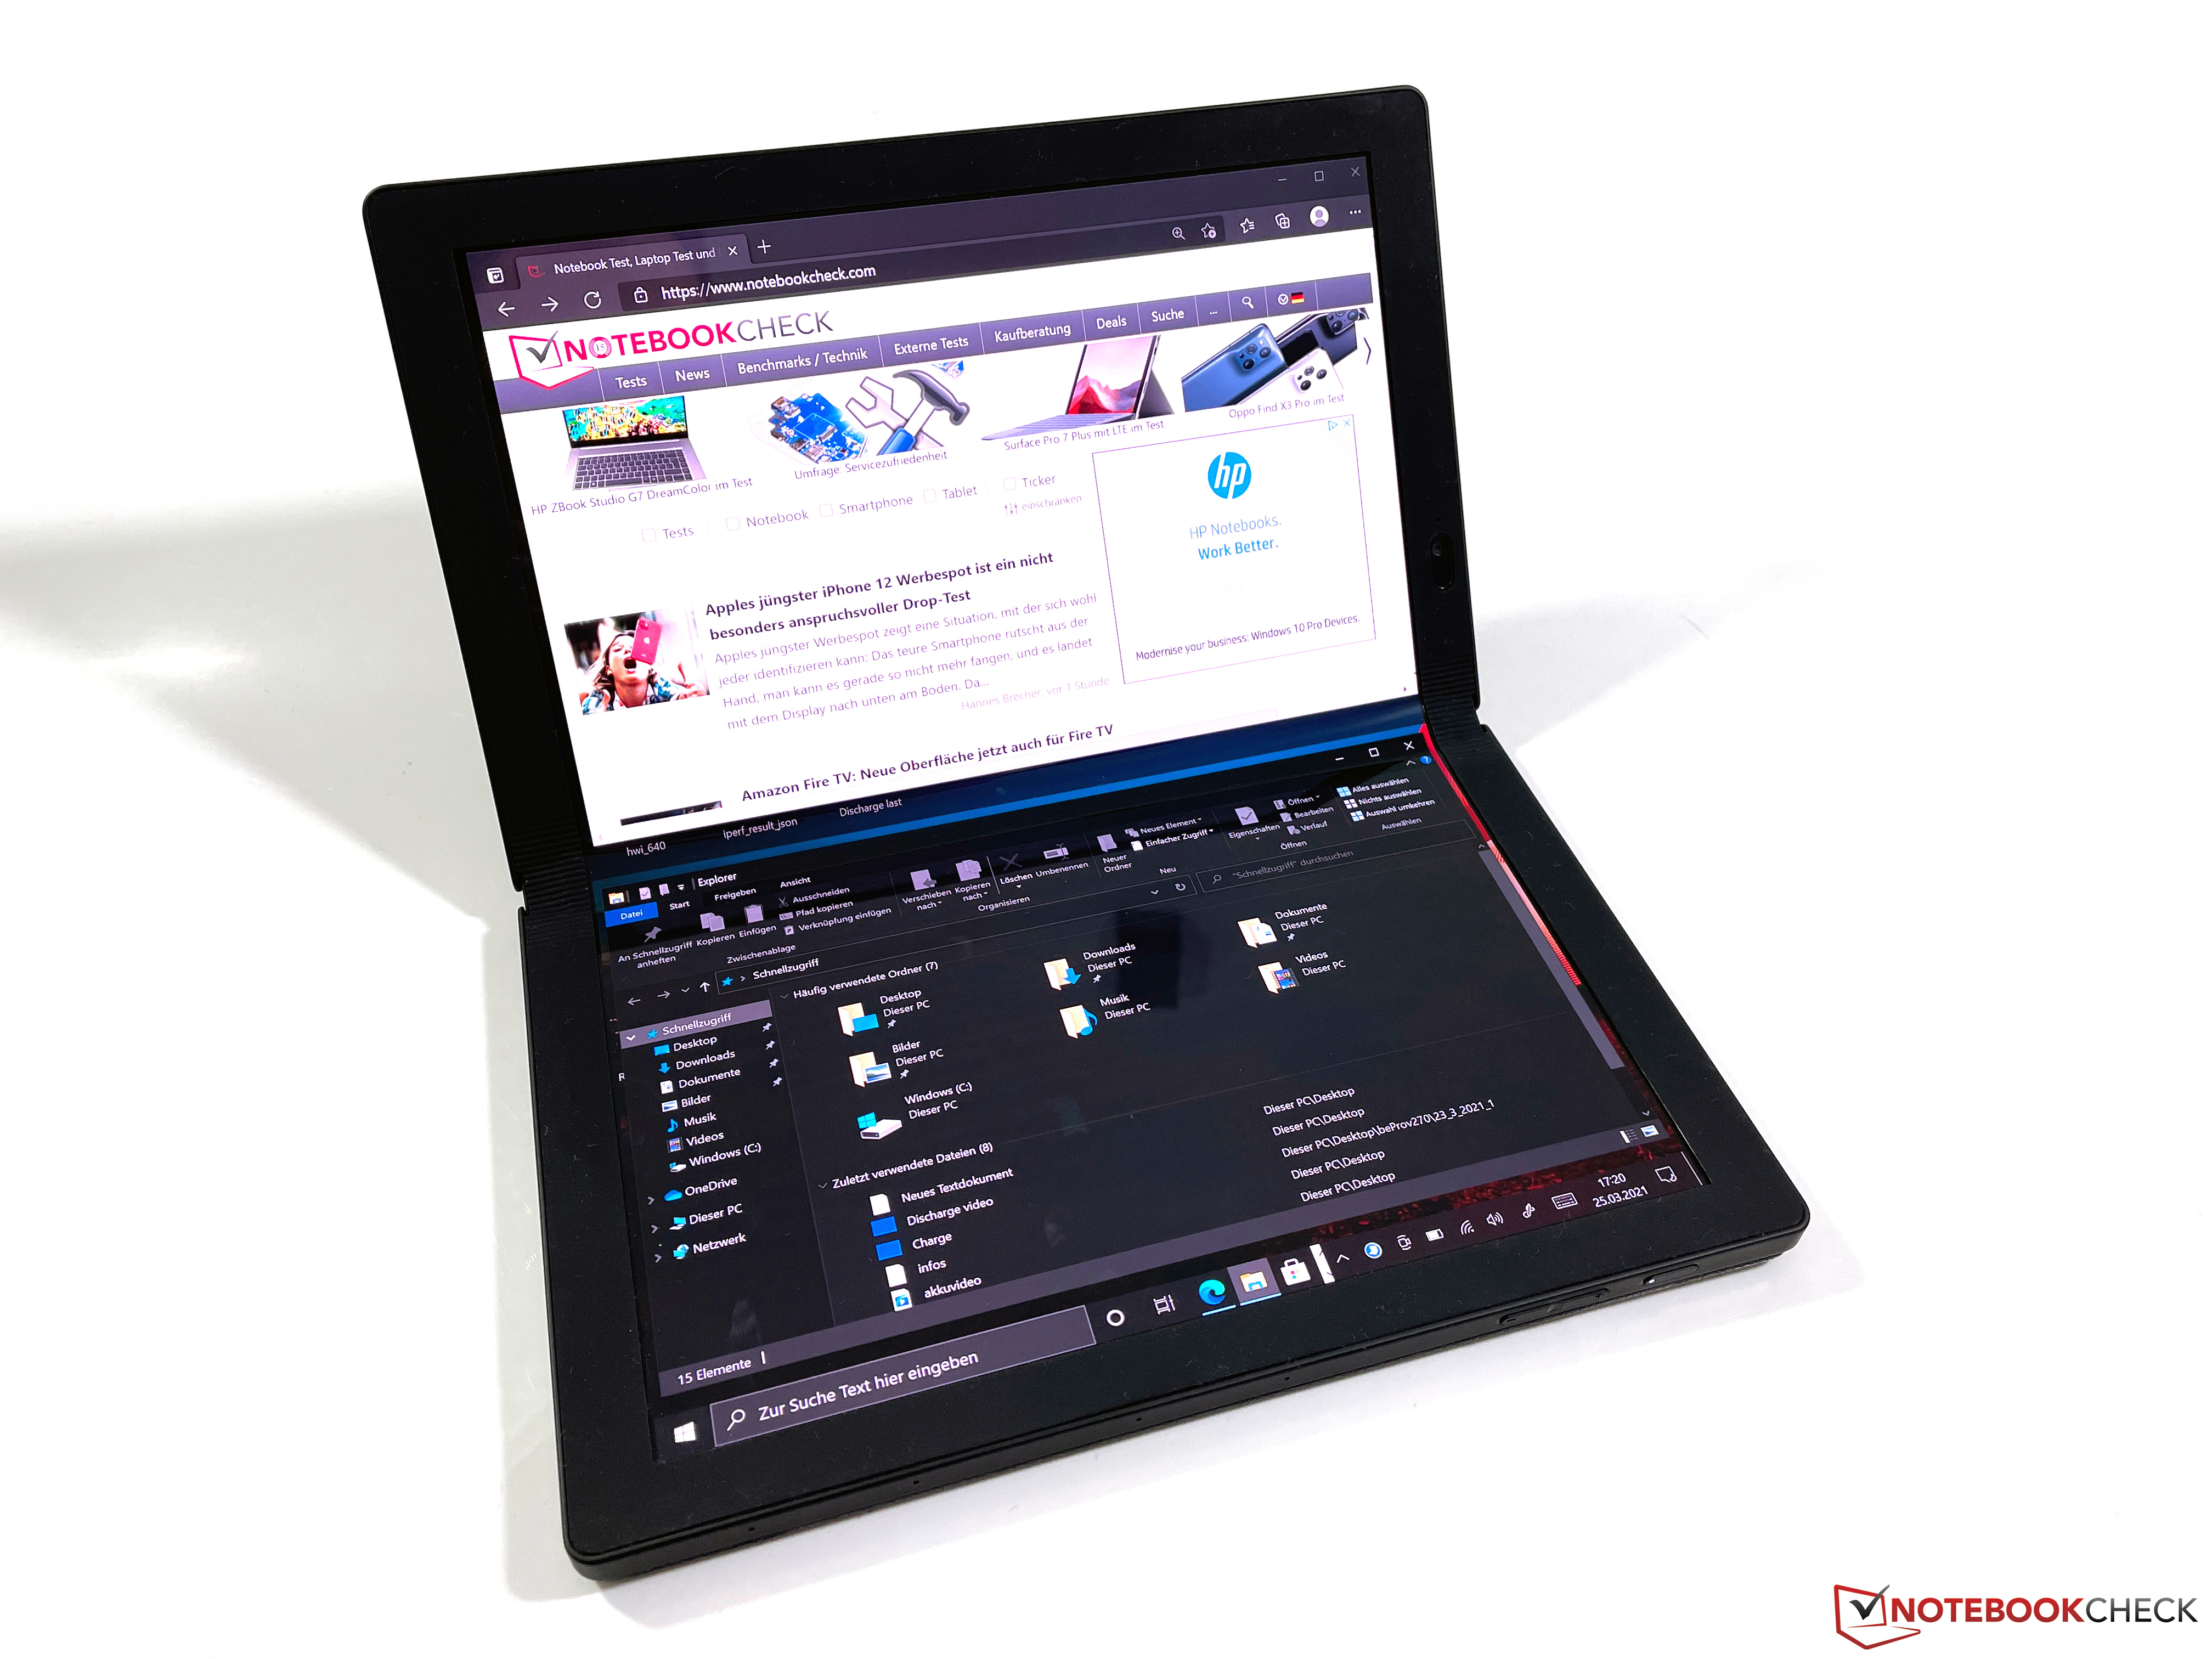 The ThinkPad X1 Fold has a foldable OLED touch screen, but it is not nice in everyday use